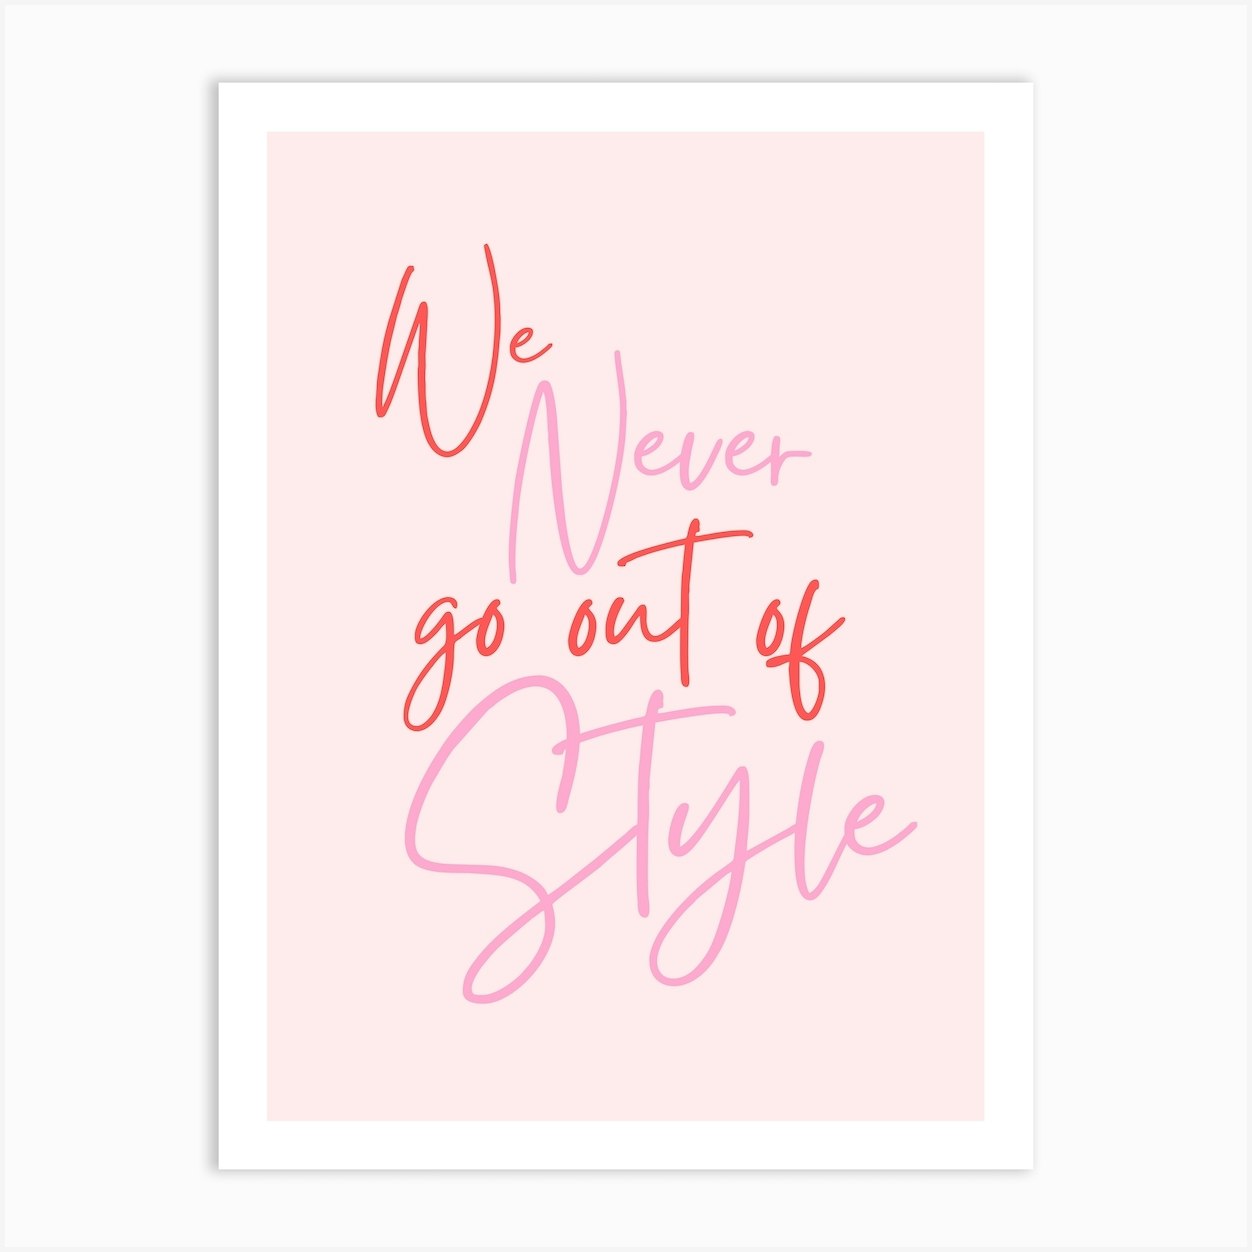 Never out of Style